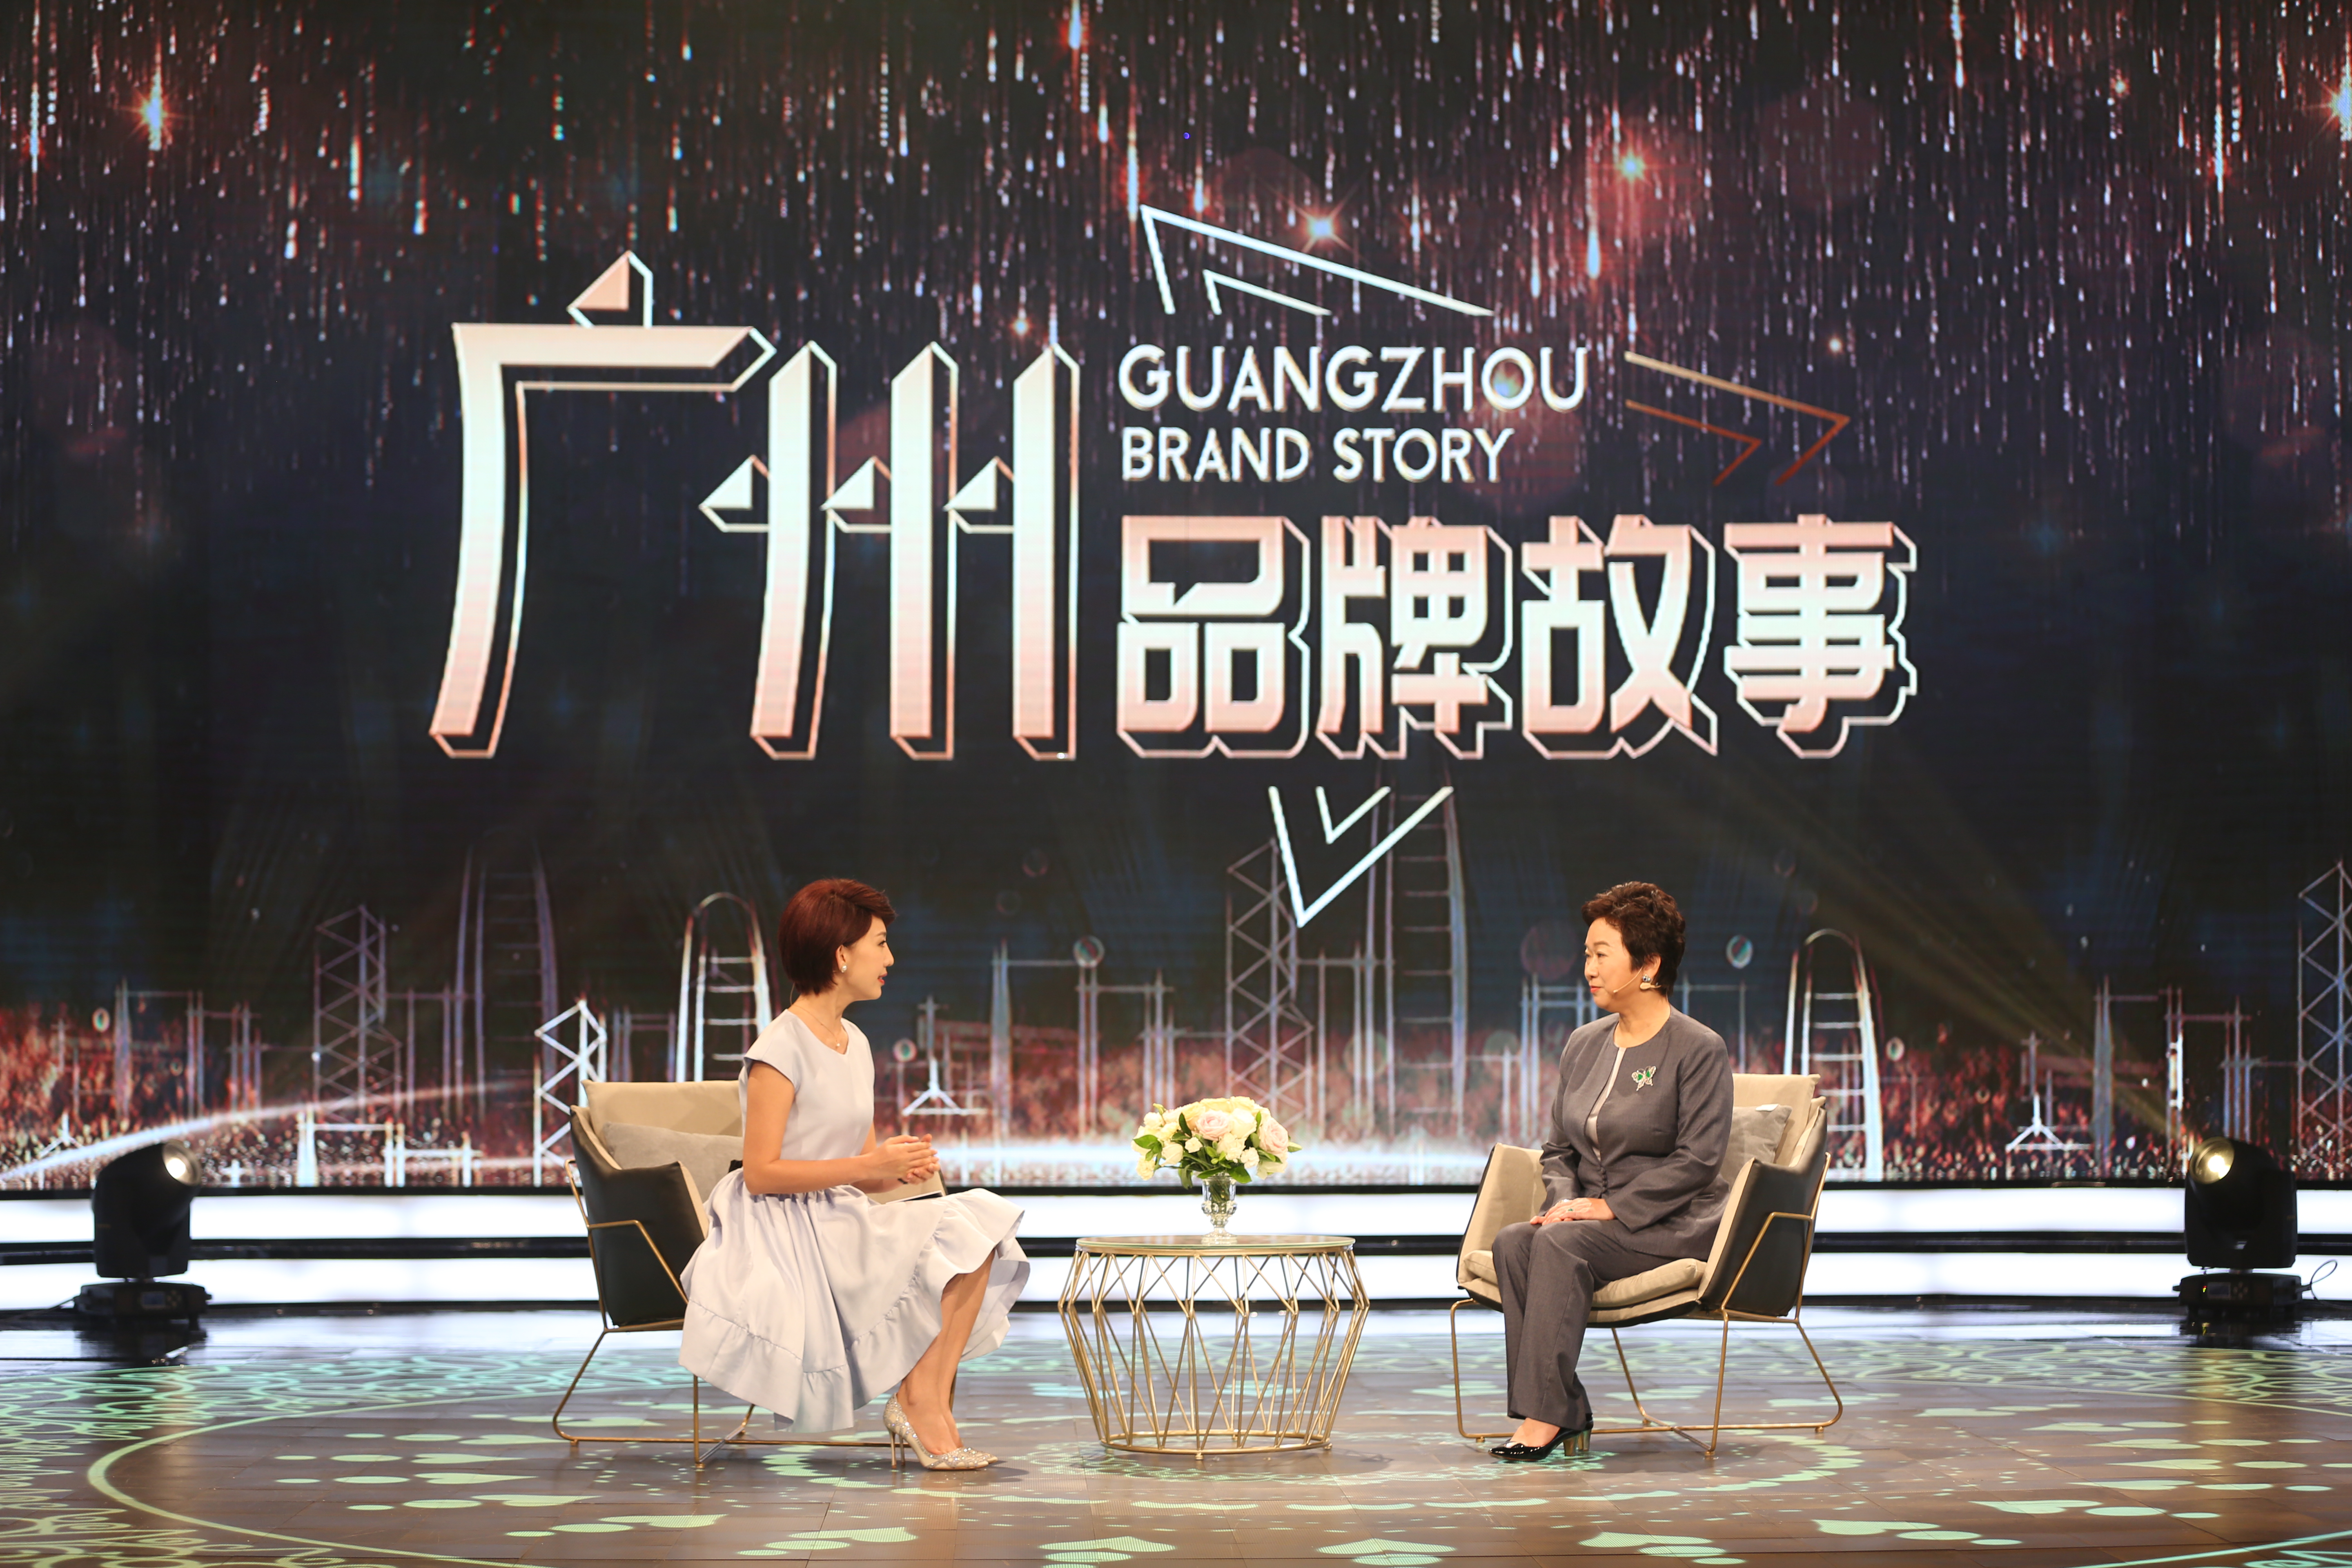 Guangzhou Brand Story The special recording scene of Wanling Square is splendid.